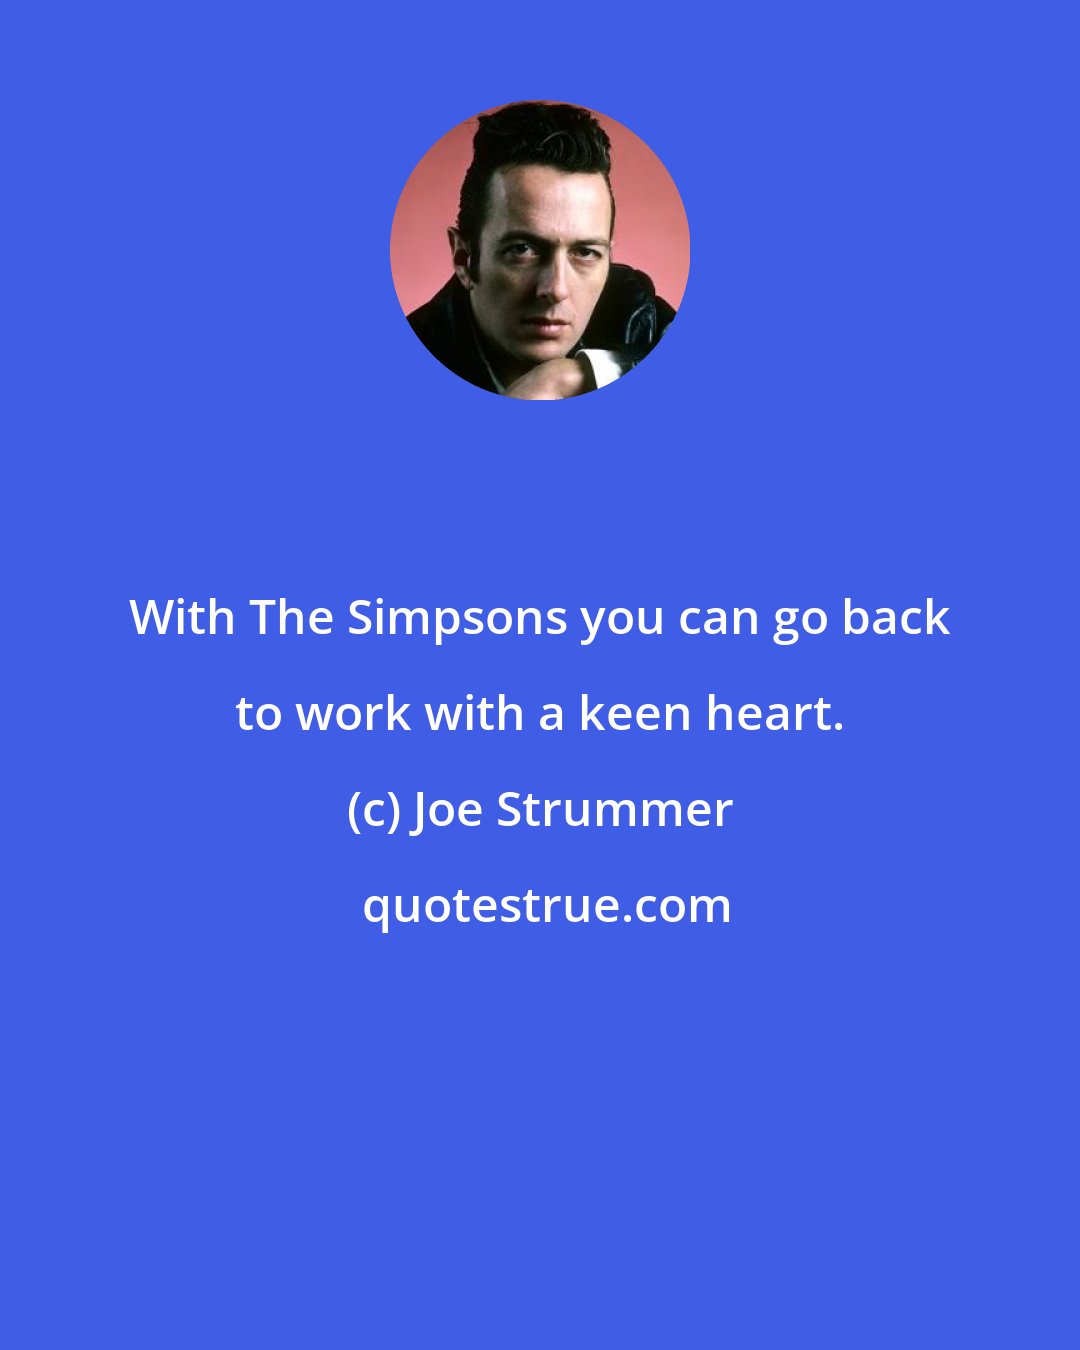 Joe Strummer: With The Simpsons you can go back to work with a keen heart.